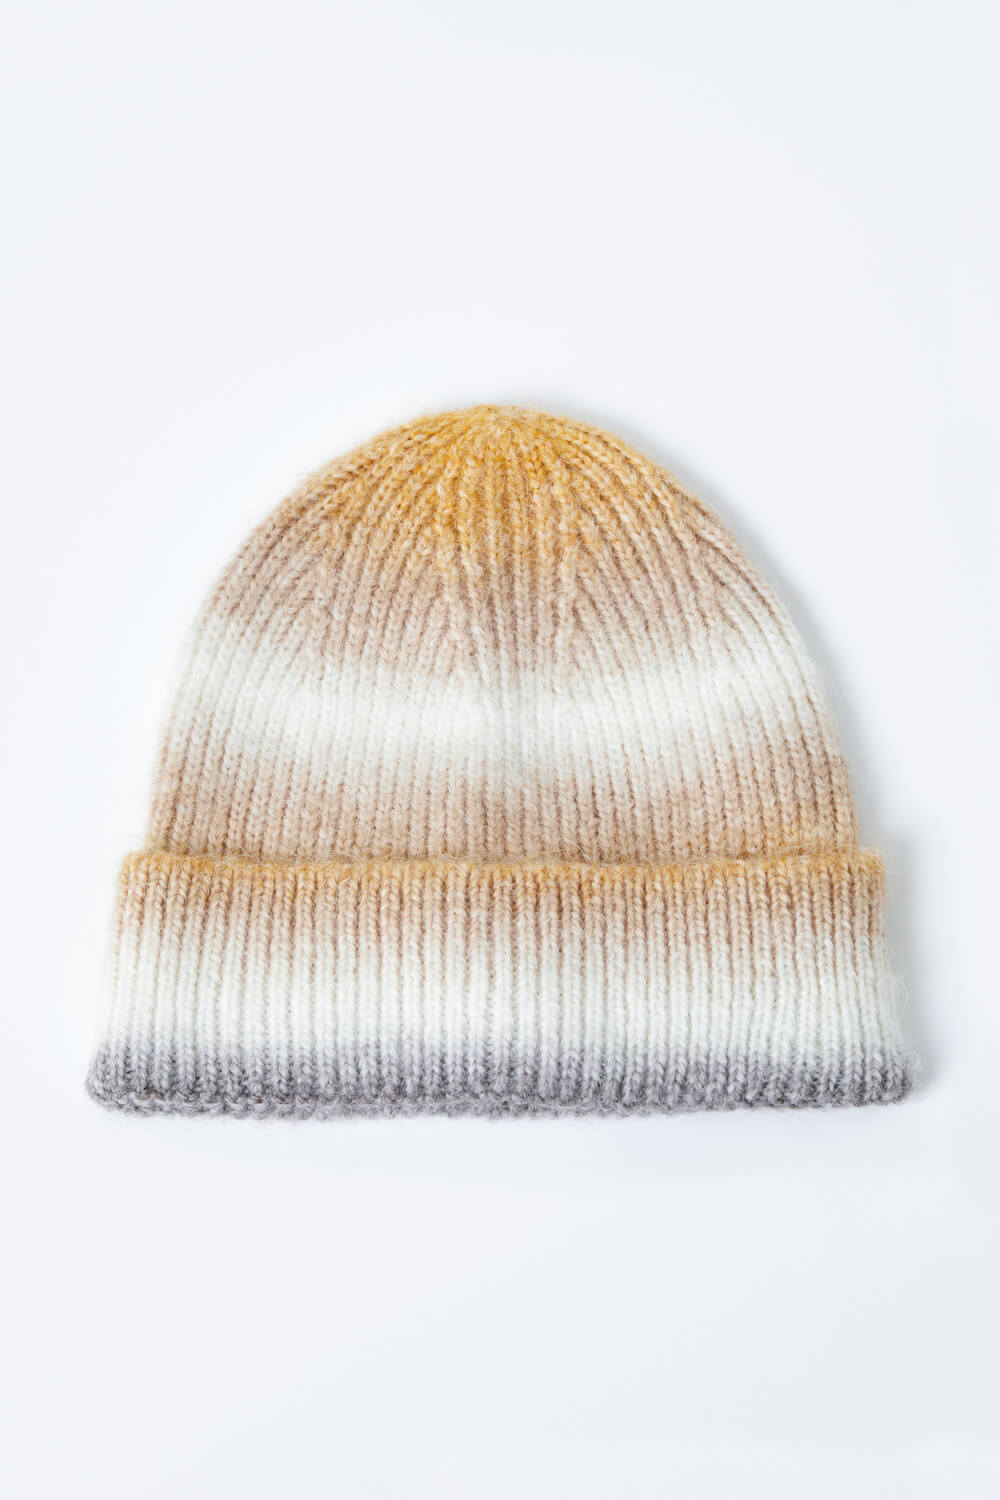 Yellow Ombre Stretch Knit Hat | Roman UK